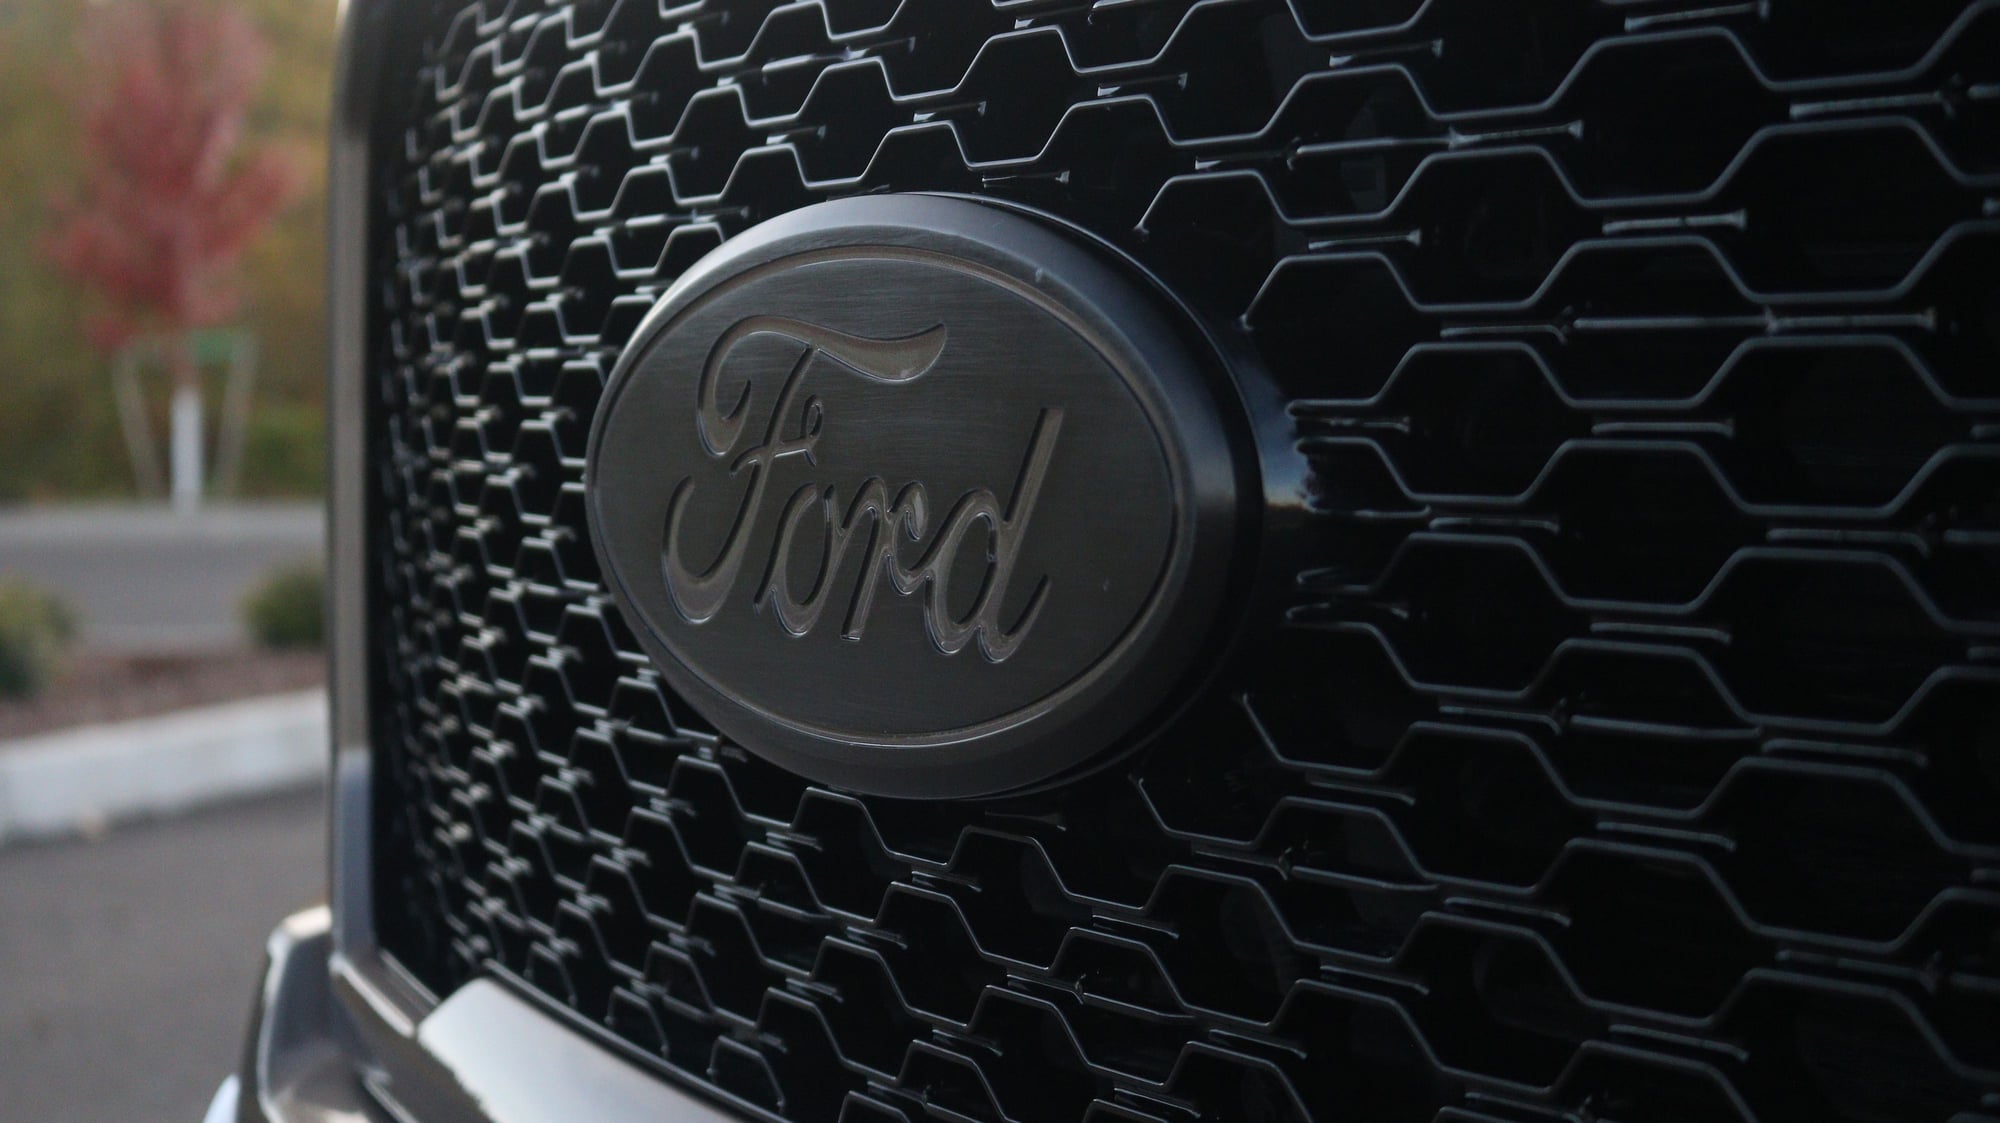 Front Grill Oval Ford Emblem - Ford F150 Forum - Community of Ford Truck  Fans